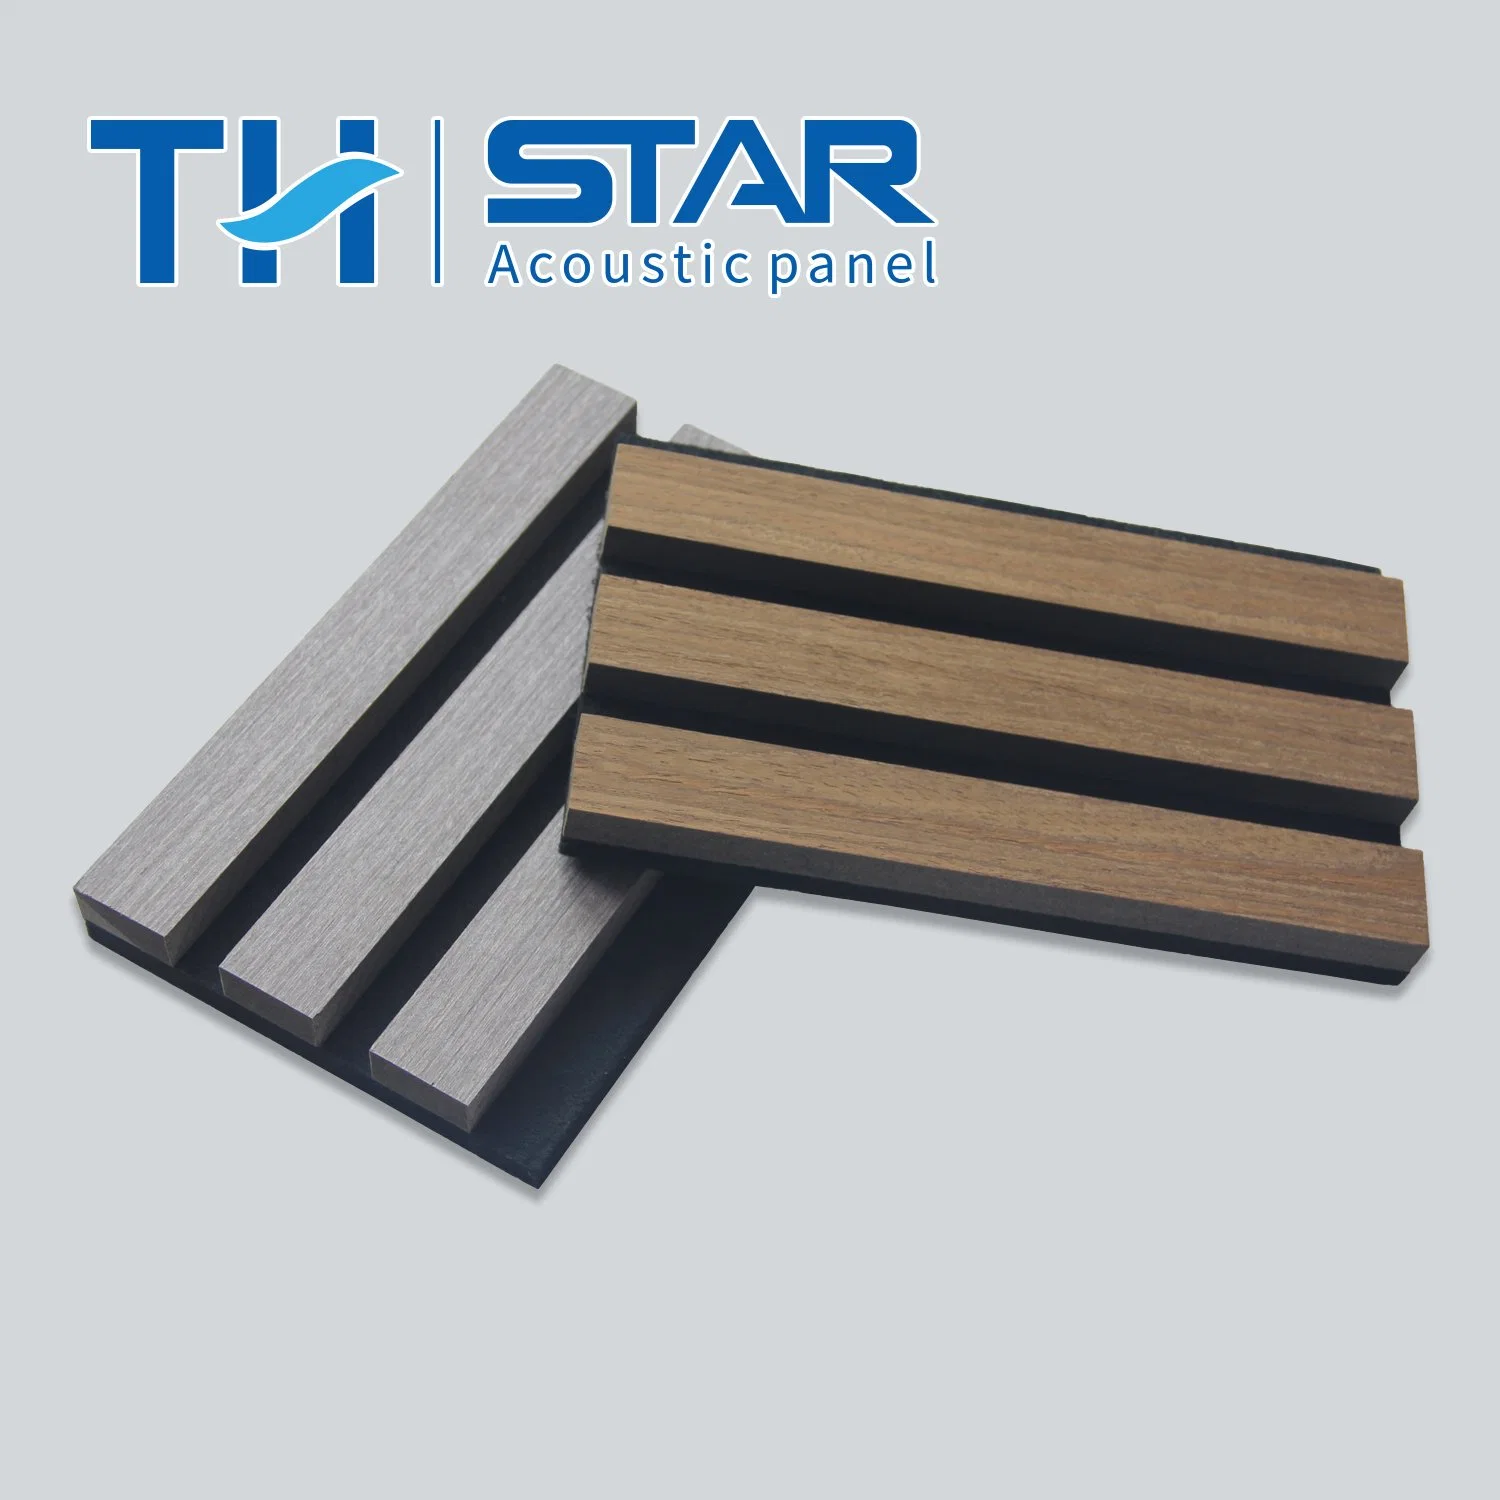 Houses Well Decor Wall Tiles Sound Absorbing European Standard Prefab Acoustic Panel Wall Wood